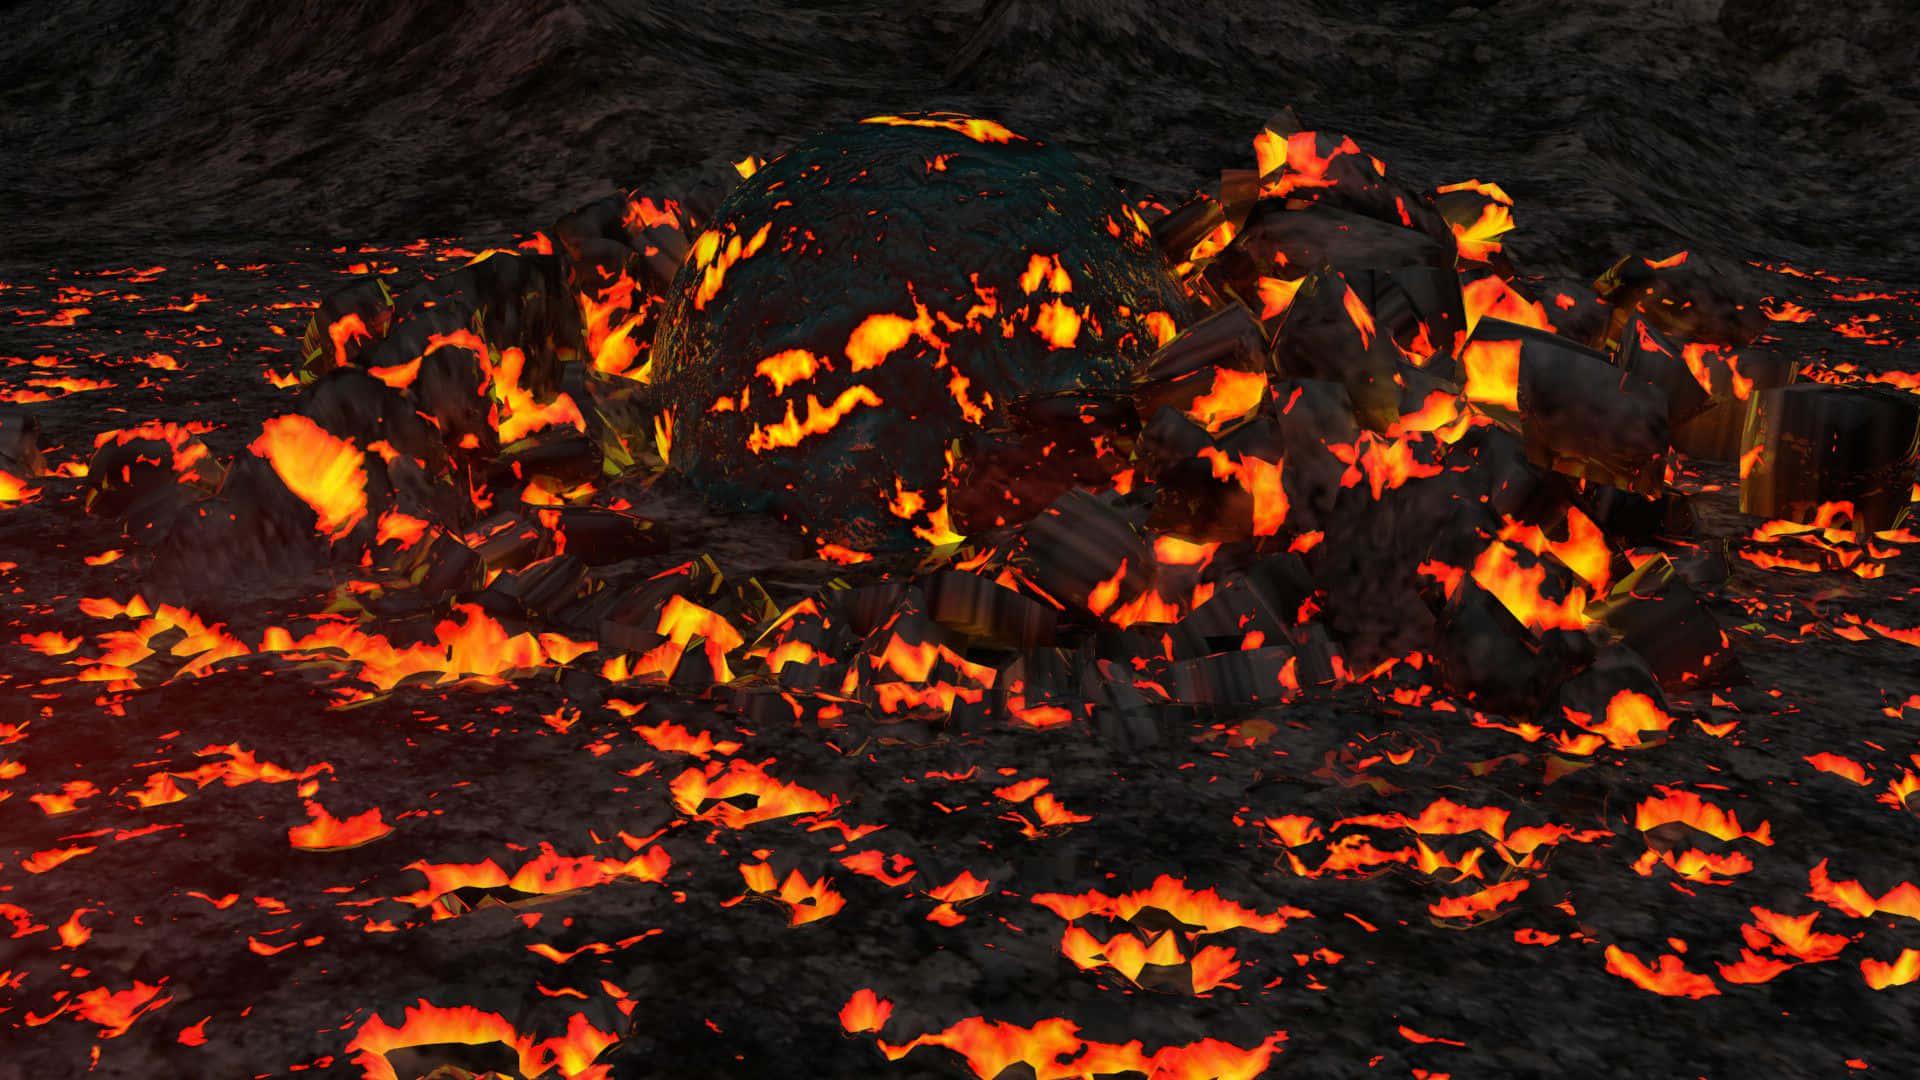 A Hot Lava Flow Moving in Slow Motion